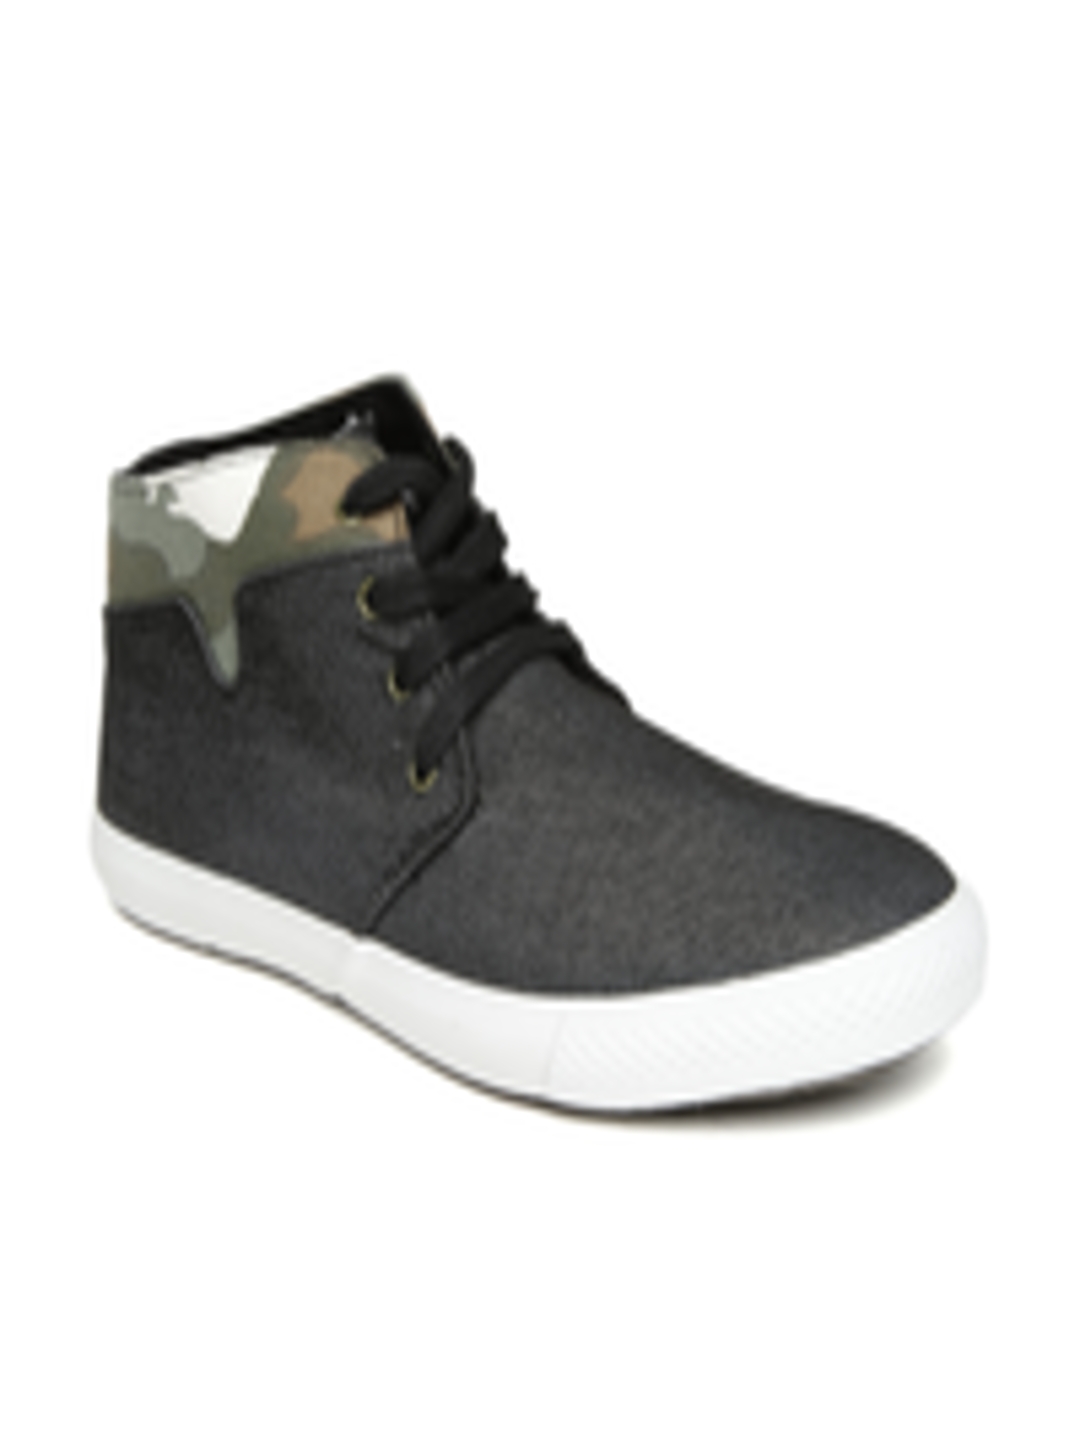 Buy Roadster Men Black Casual Shoes - Casual Shoes for Men 1176121 | Myntra